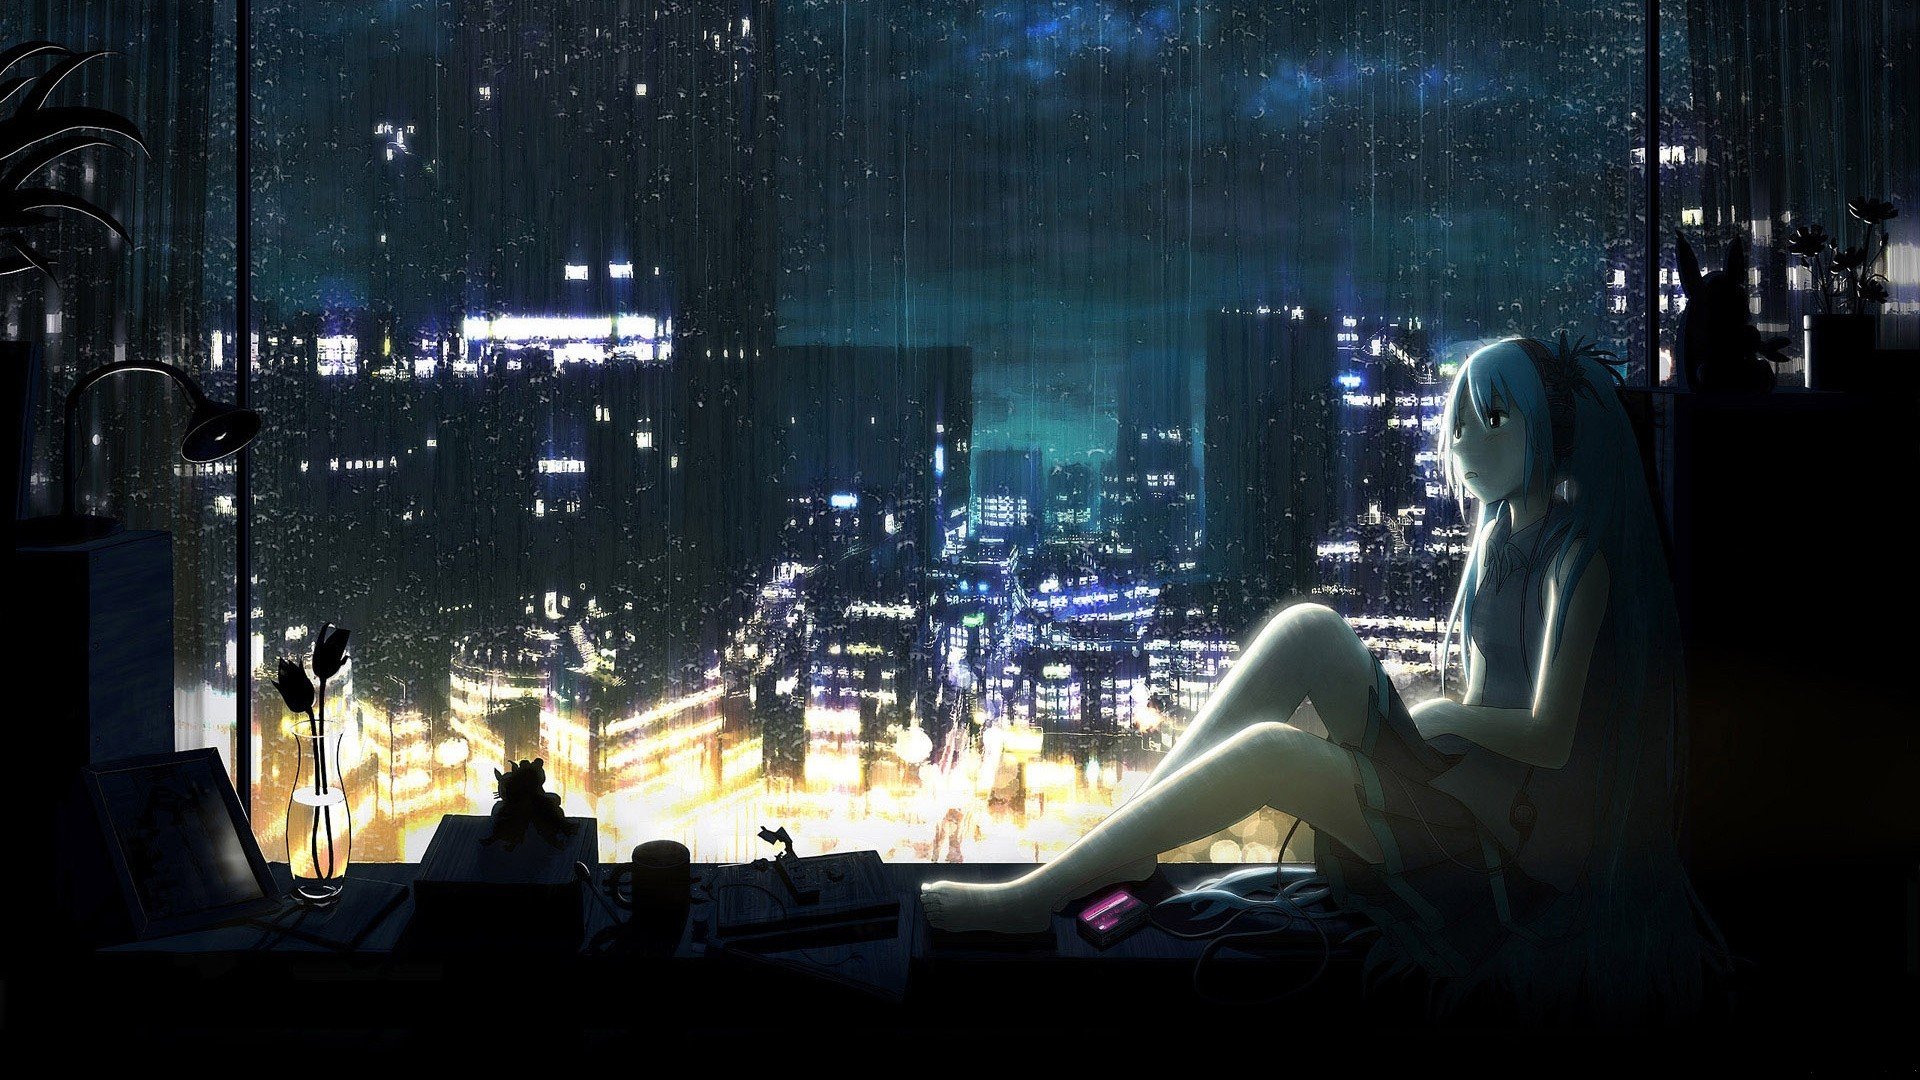 headphones, Water, Clouds, Cityscapes, Dark, Vocaloid, Night, Lights, Rain, Flowers, Hatsune, Miku, Wet, Skirts, Cups, Long, Hair, Window, Barefoot, Lamps, Books, Skyscapes, Anime, Girls, Vase, Mp3, Player Wallpaper